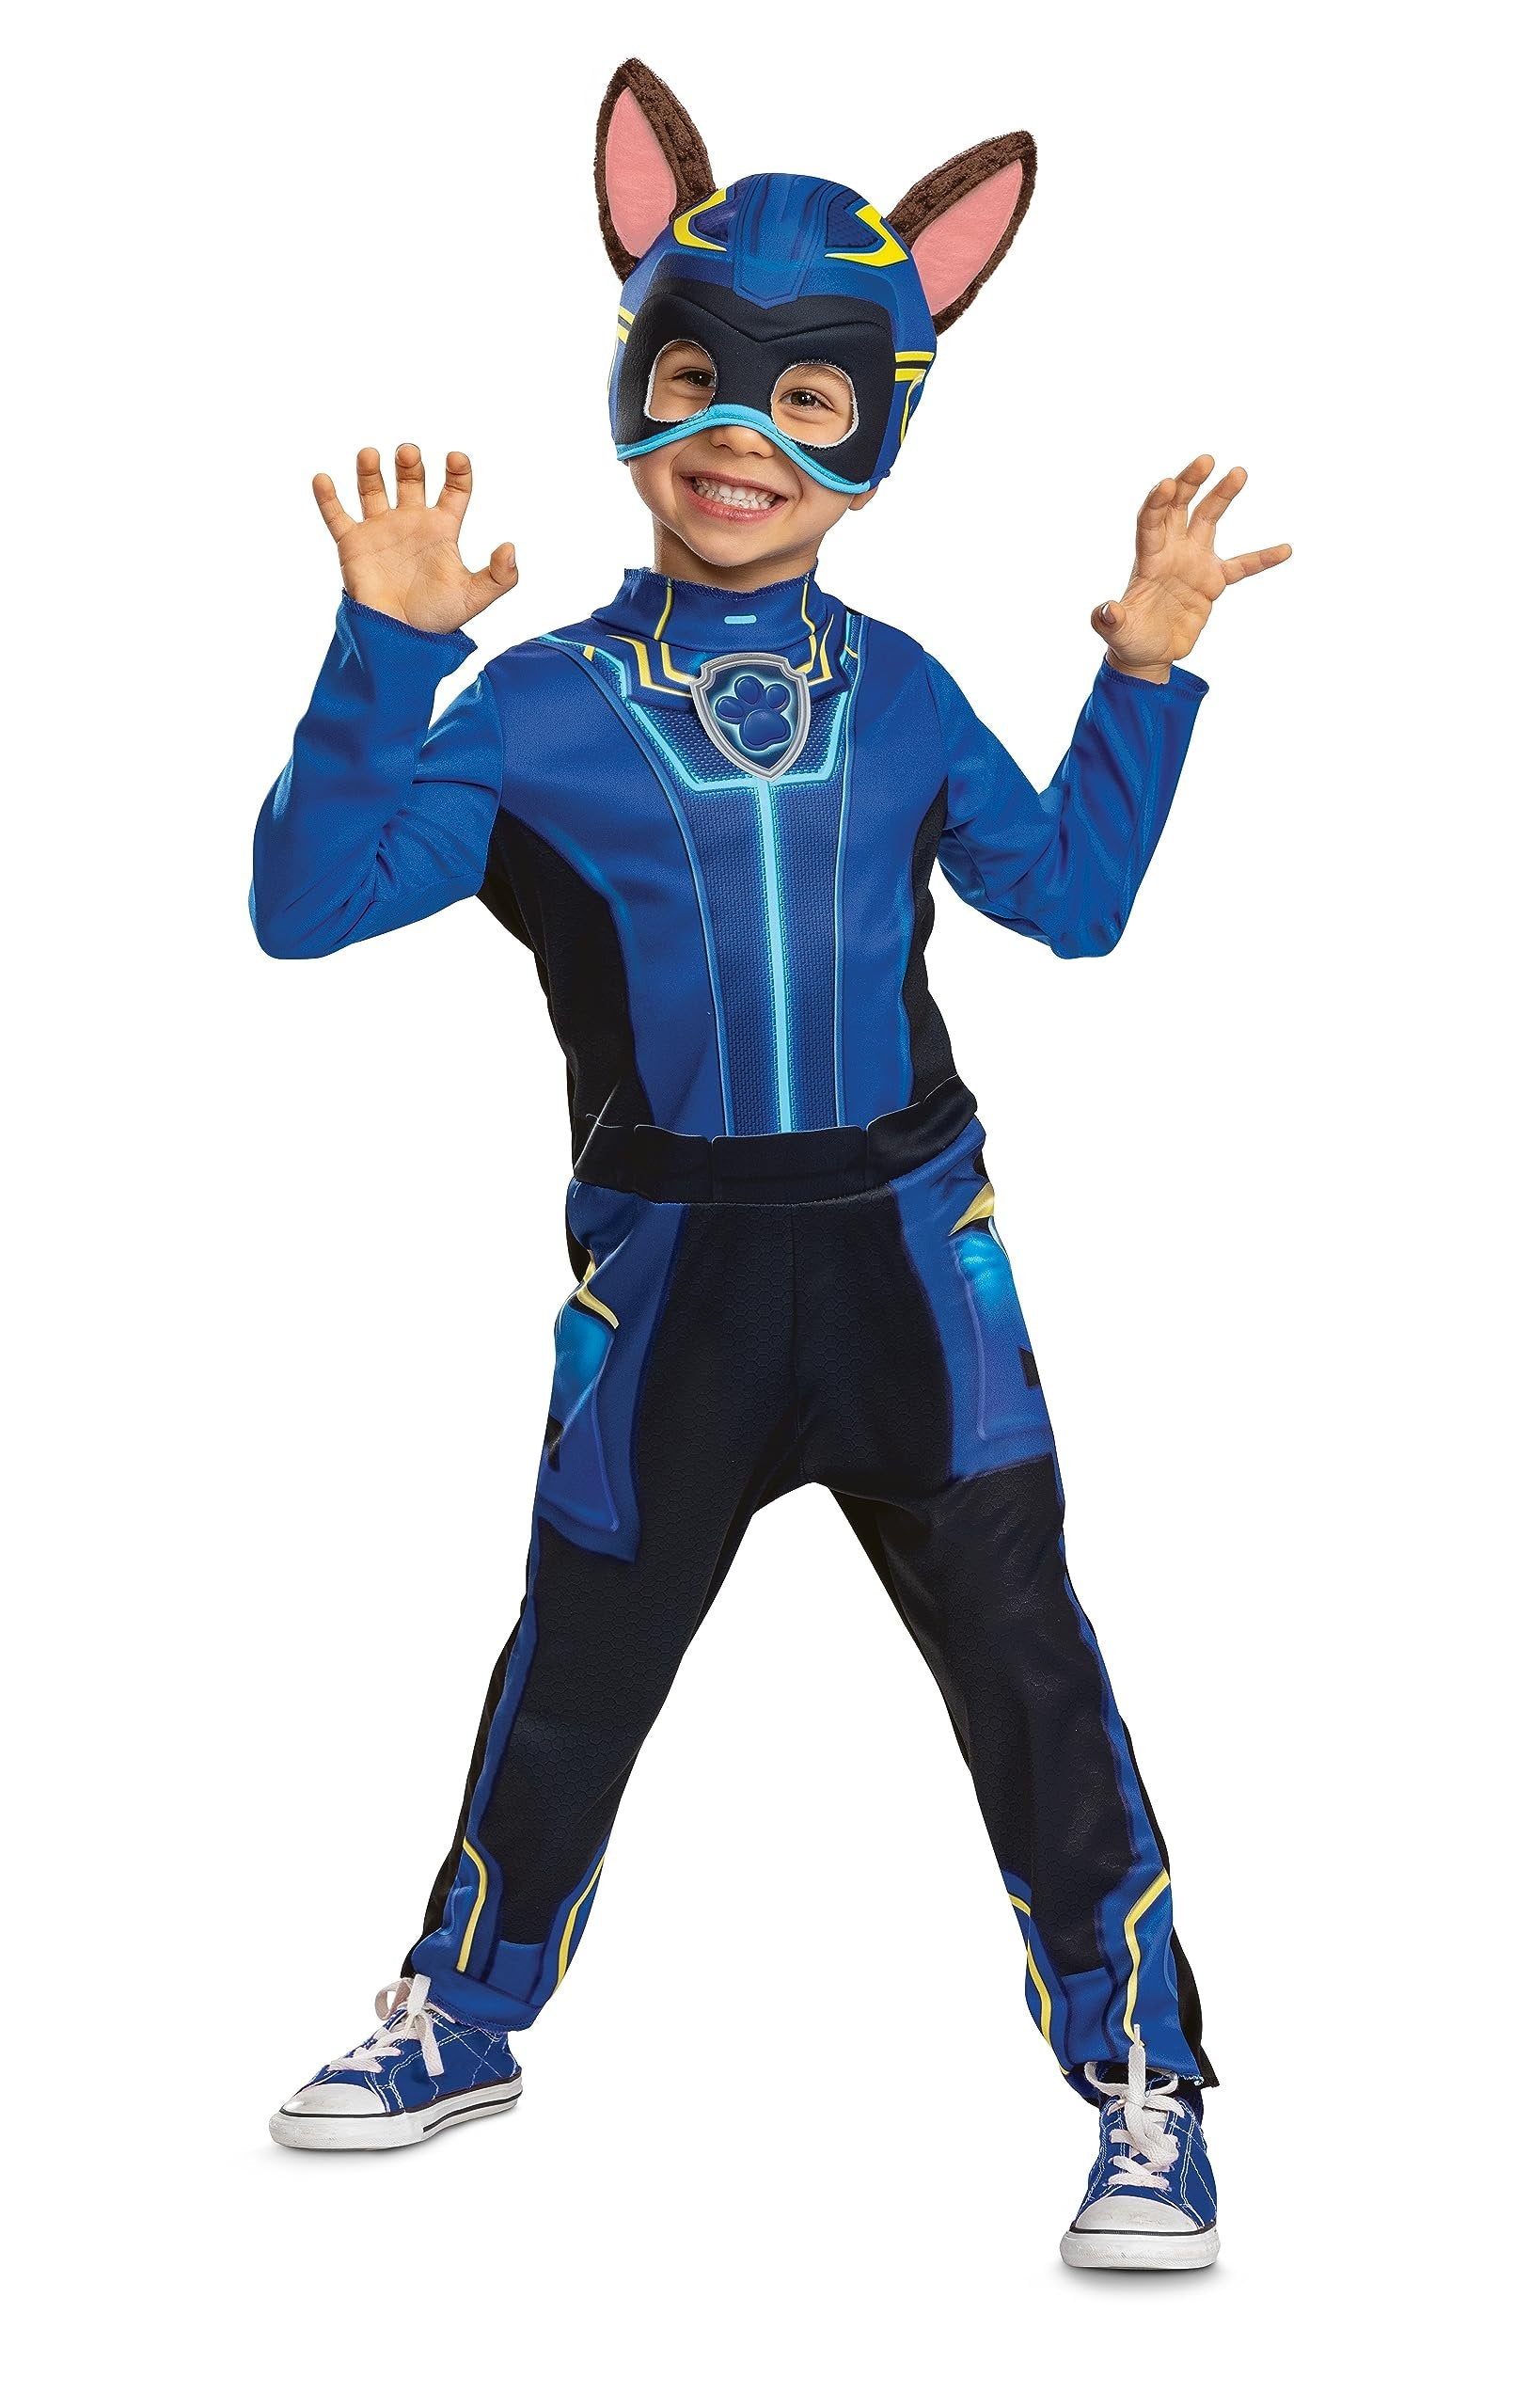 Chase Paw Patrol Costume, Official Toddler Paw Patrol Halloween Outfit with Headpiece for Kids, Size (2T)